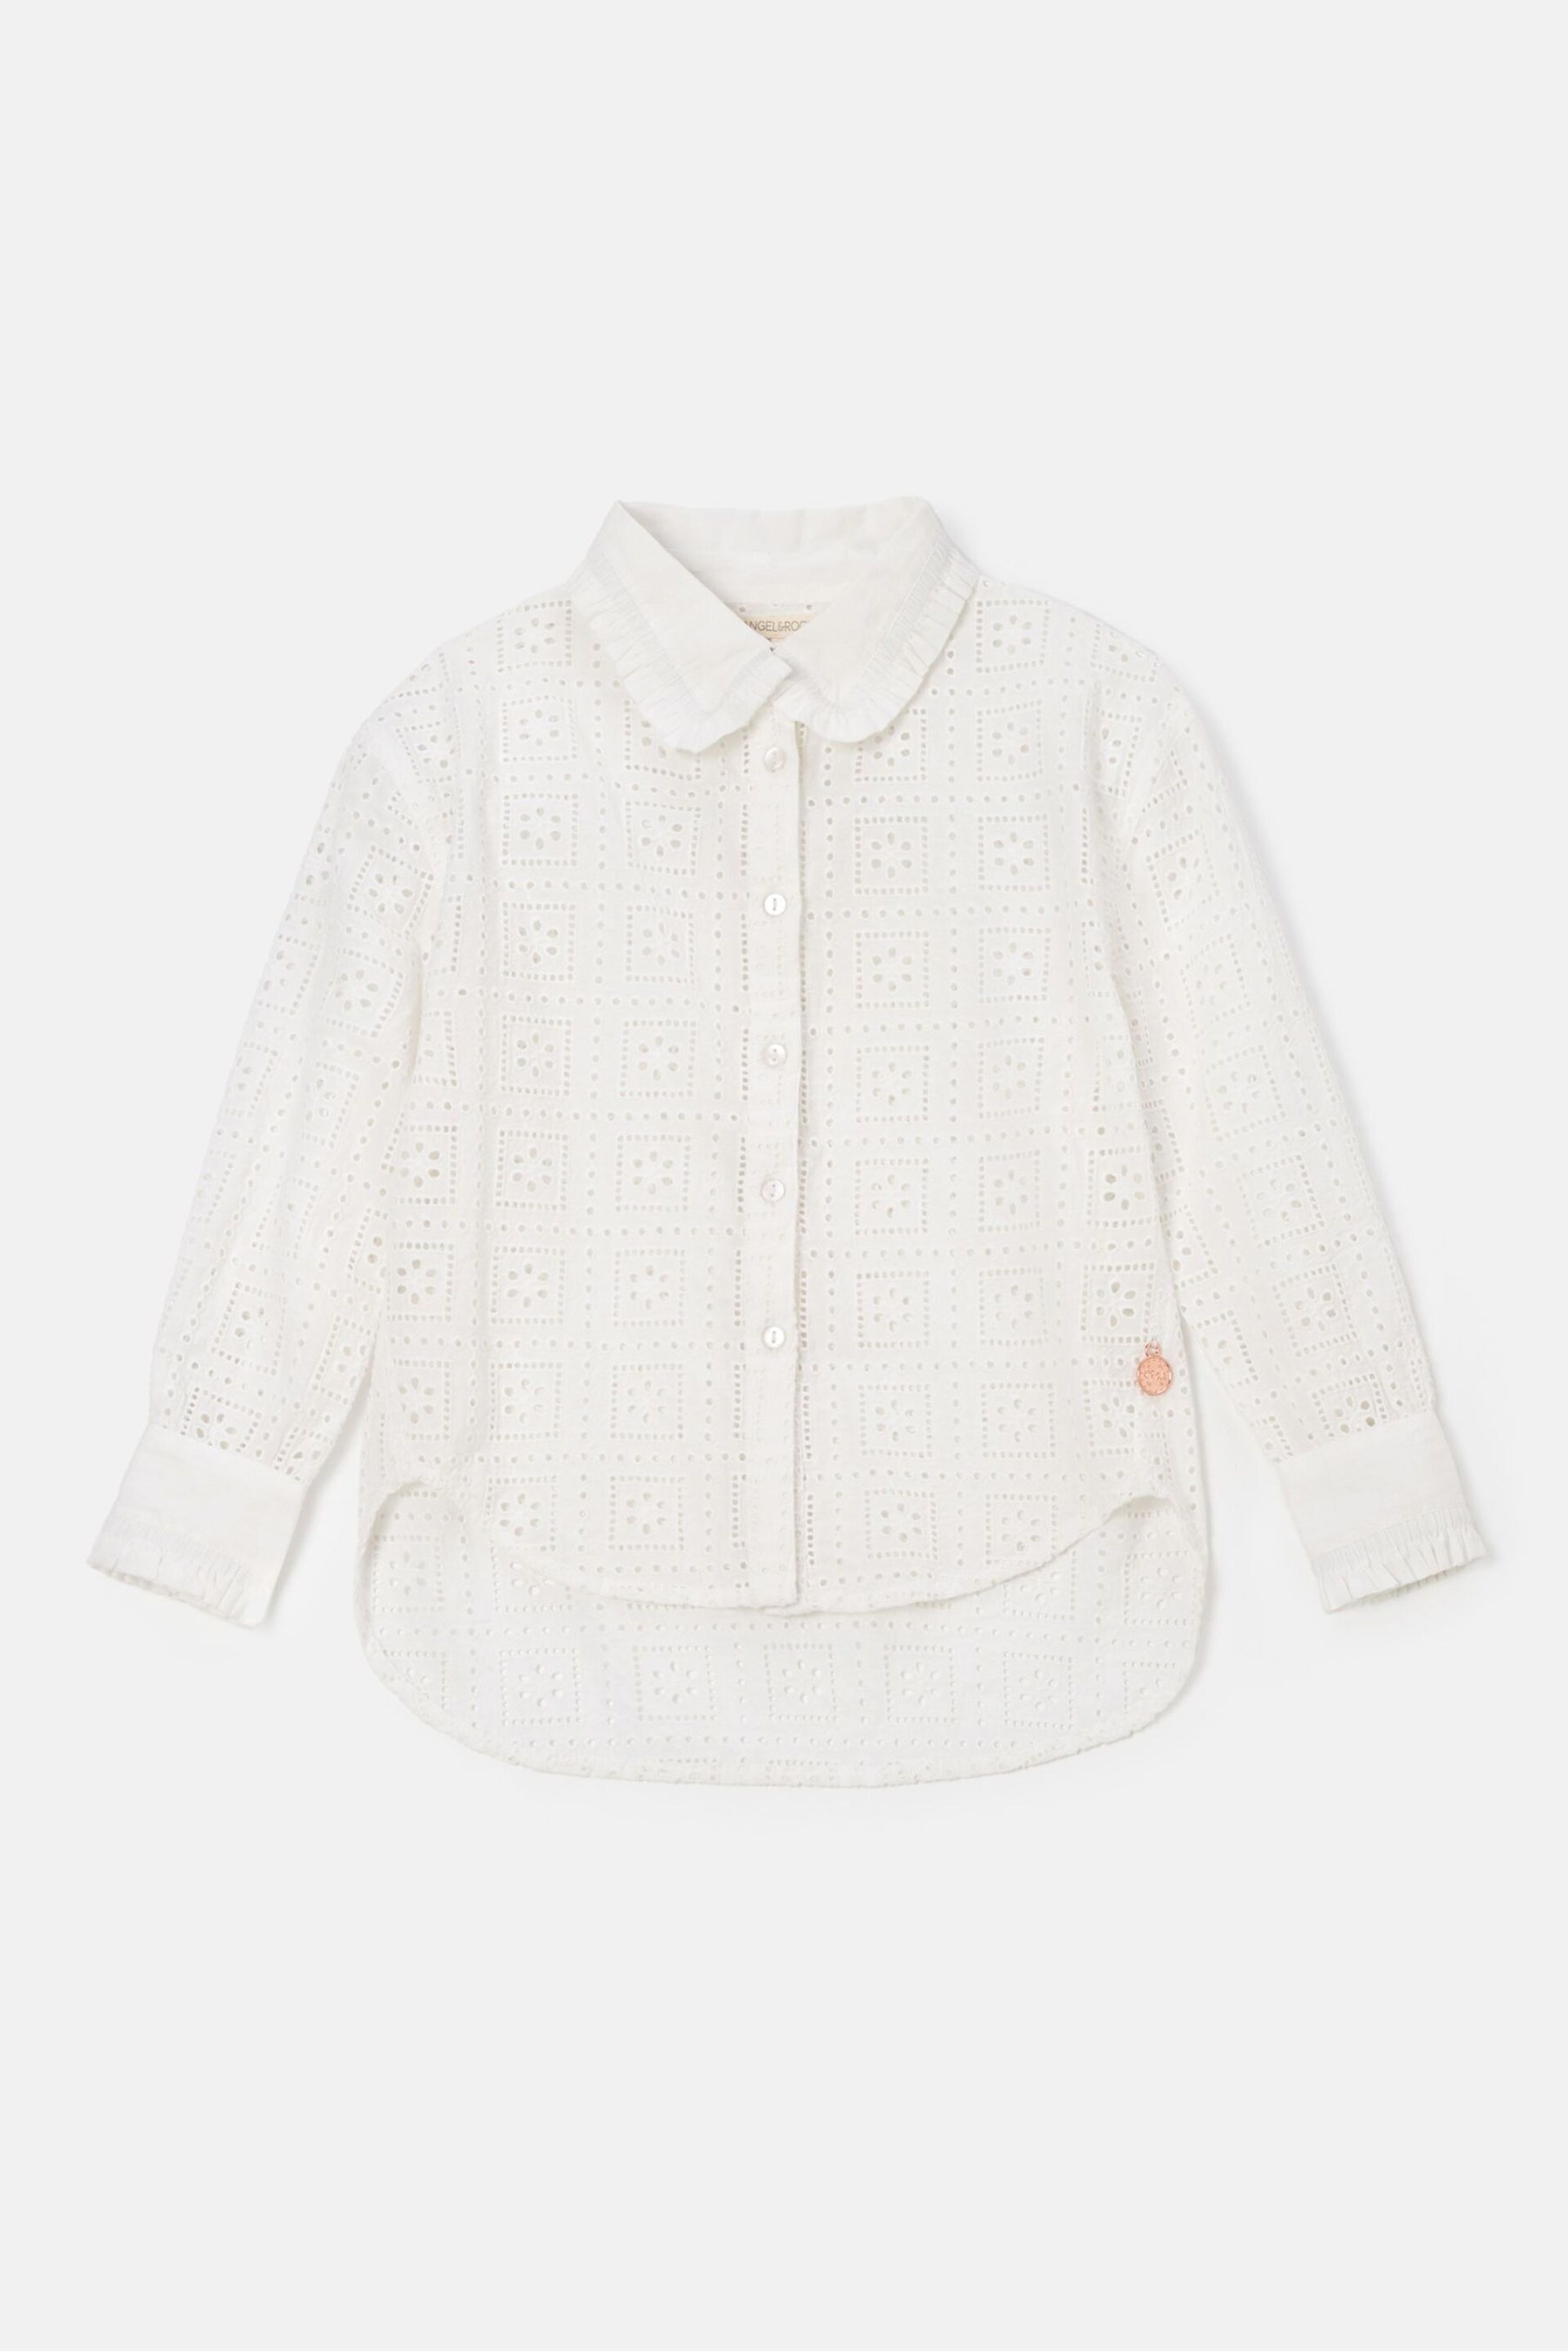 Angel & Rocket White Broderie Marcella Shirt - Image 4 of 6